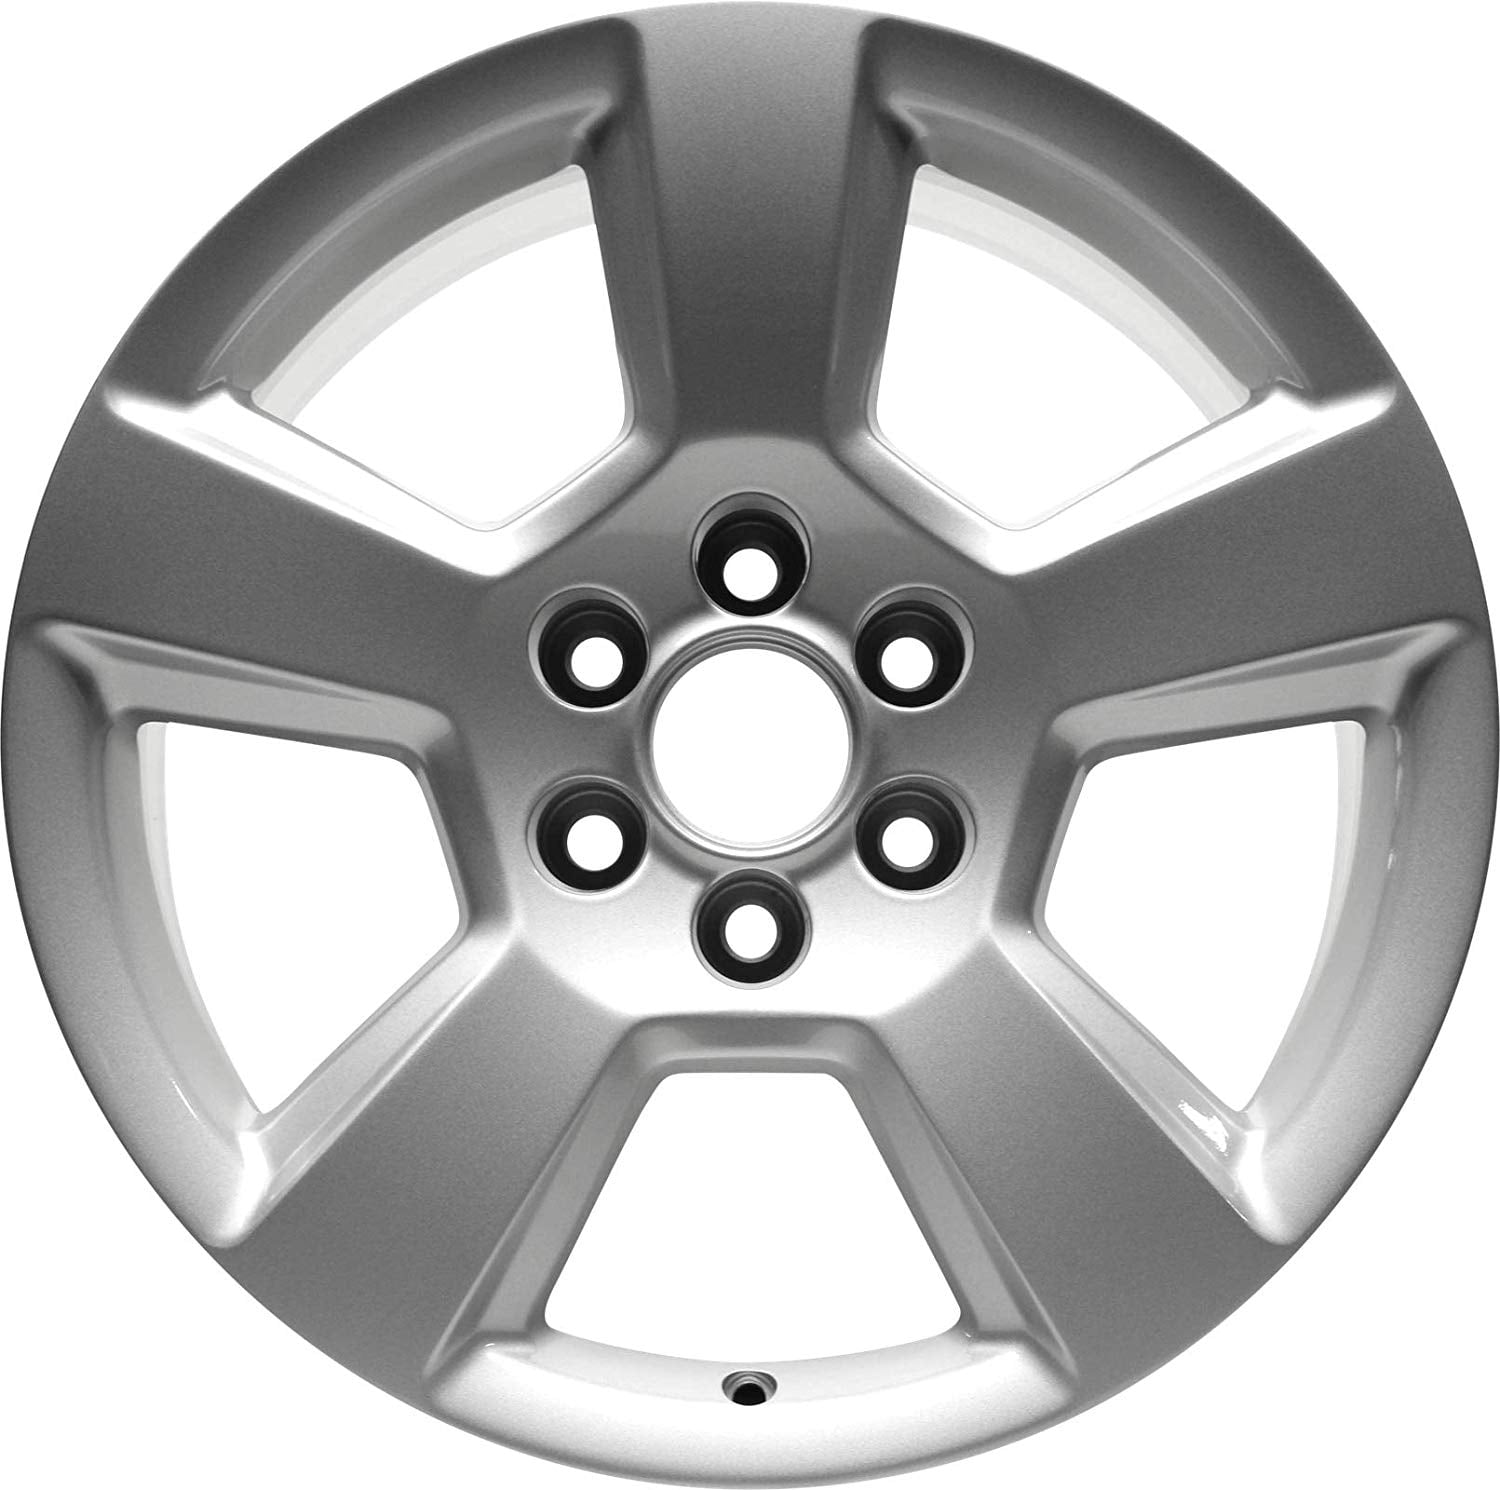 New 17" Replacement Alloy Wheel Rim for 2015-2018 Chevy Silverado 1500 Tahoe